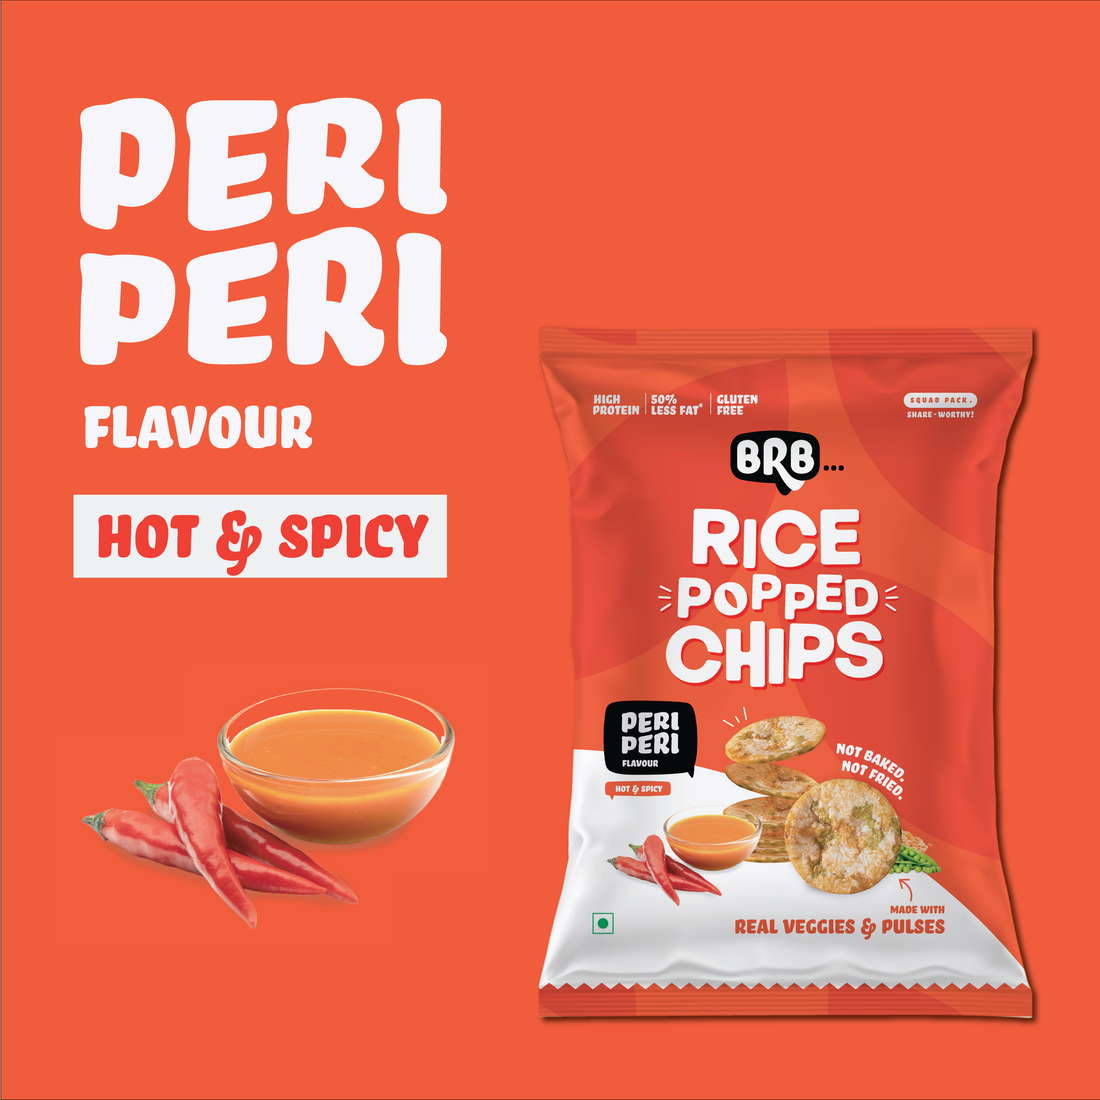 Rice Popped Chips -  20 Packs (48 Grams Each) - 4 Flavours X 5 Packs